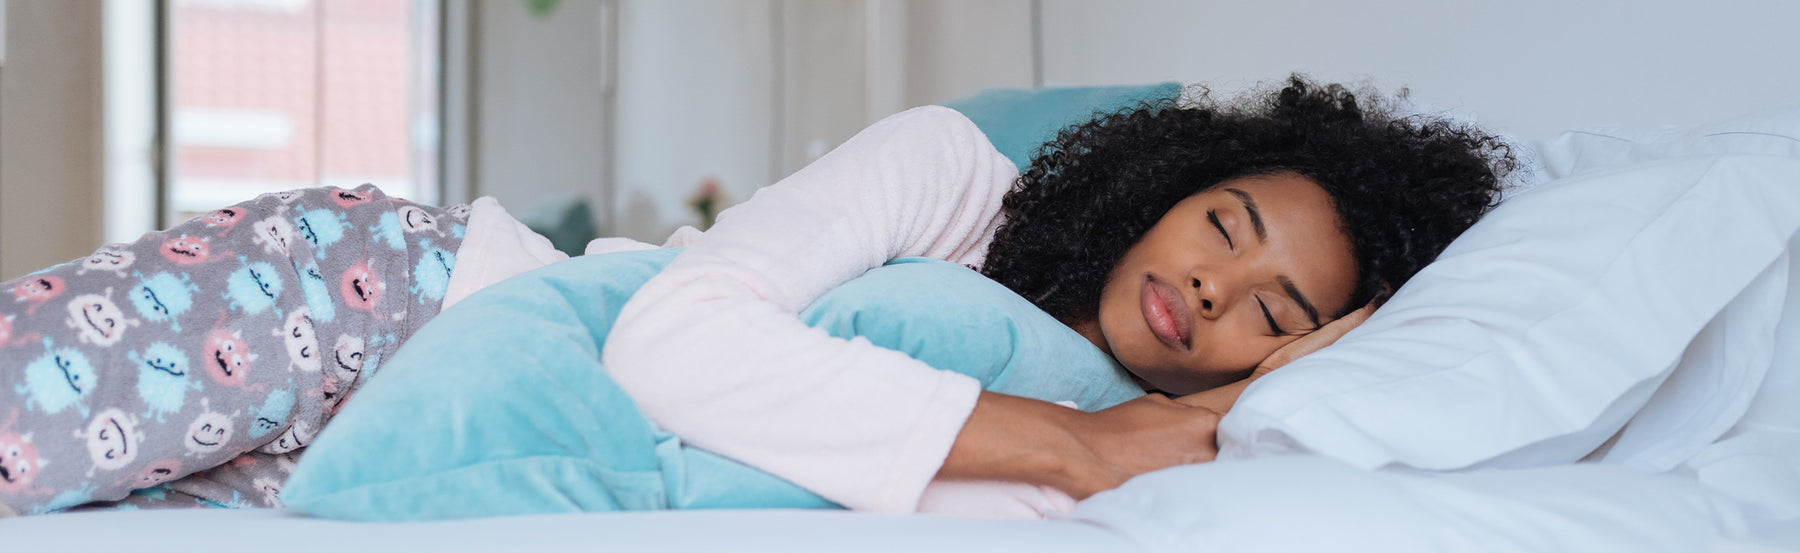 Sleep Studies: Why They’re Important and What to Expect